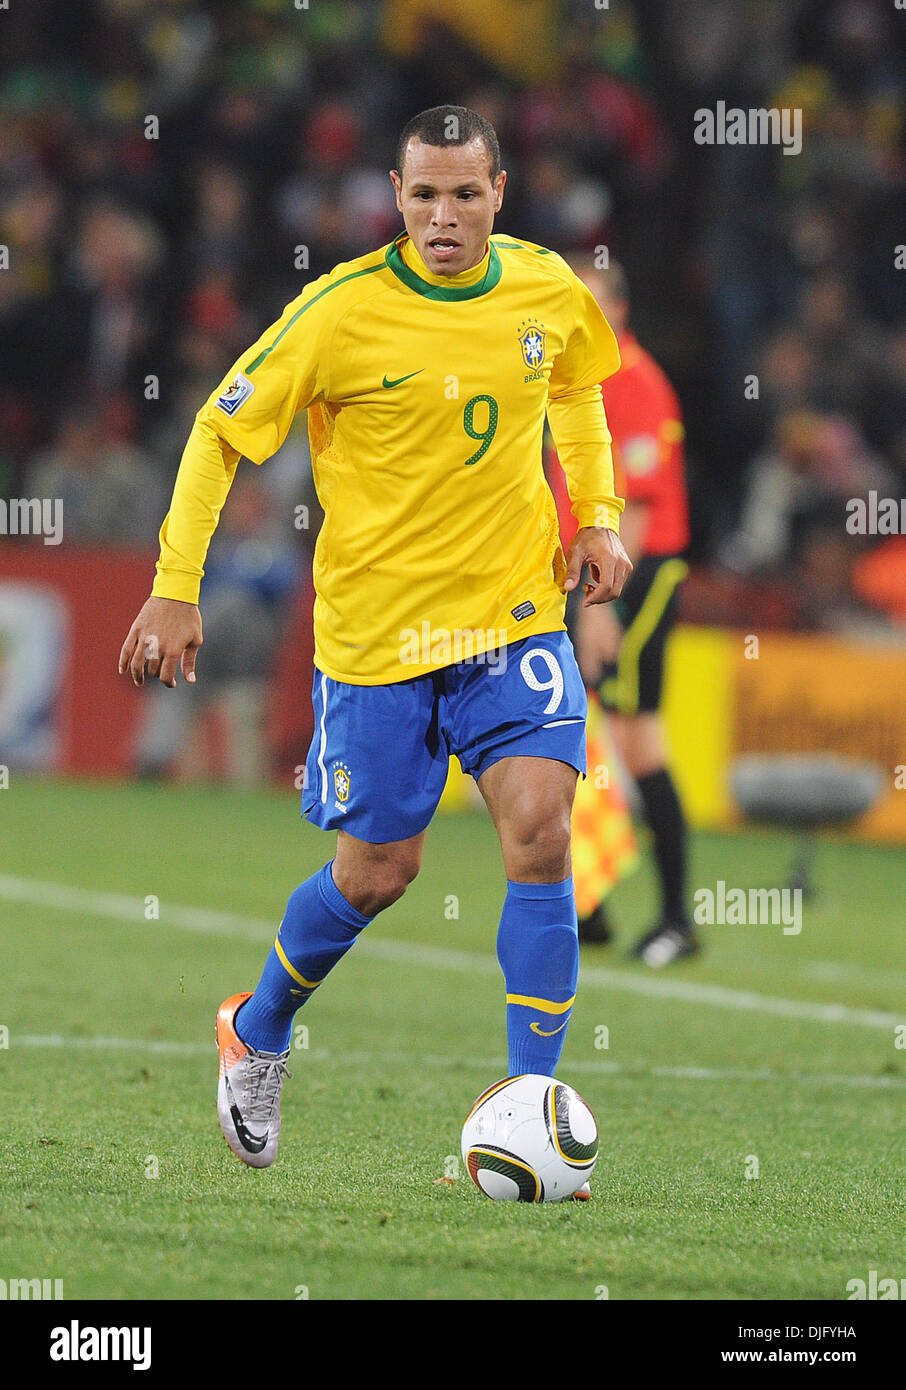 June 28, 2010 - Johannesburg, South Africa - Luis Fabiano of Brazil in action during the 2010 FIFA World Cup soccer match between Brazil and Chile at Ellis Park Stadium on June 28, 2010 in Johannesburg, South Africa. (Credit Image: © Luca Ghidoni/ZUMApress.com) Stock Photo